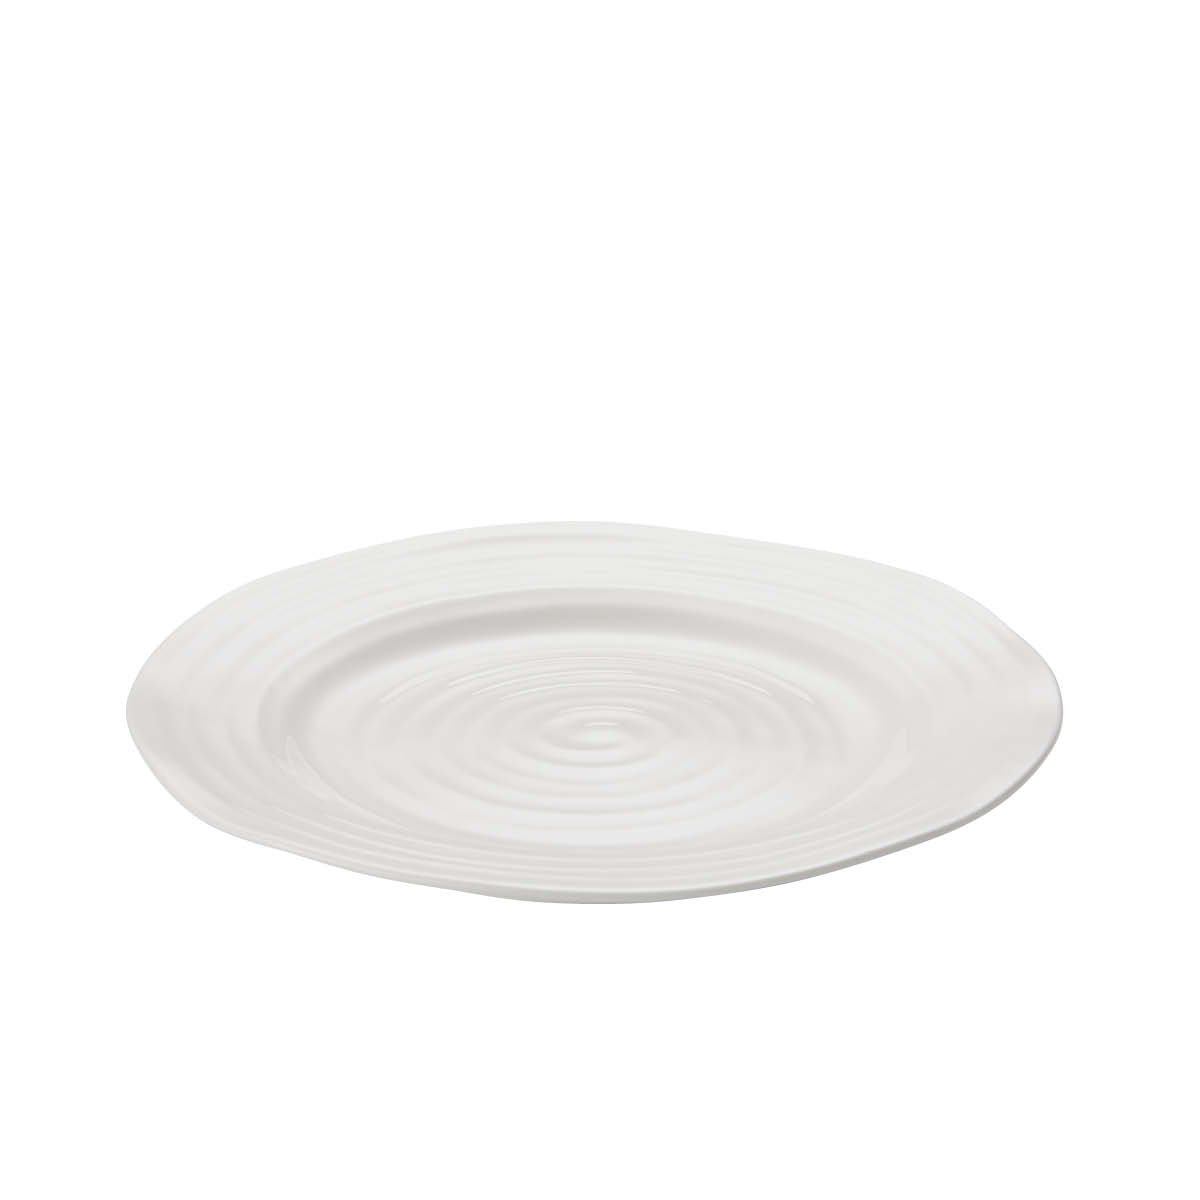 Sophie Conran Set of 4 Side Plates, White image number null